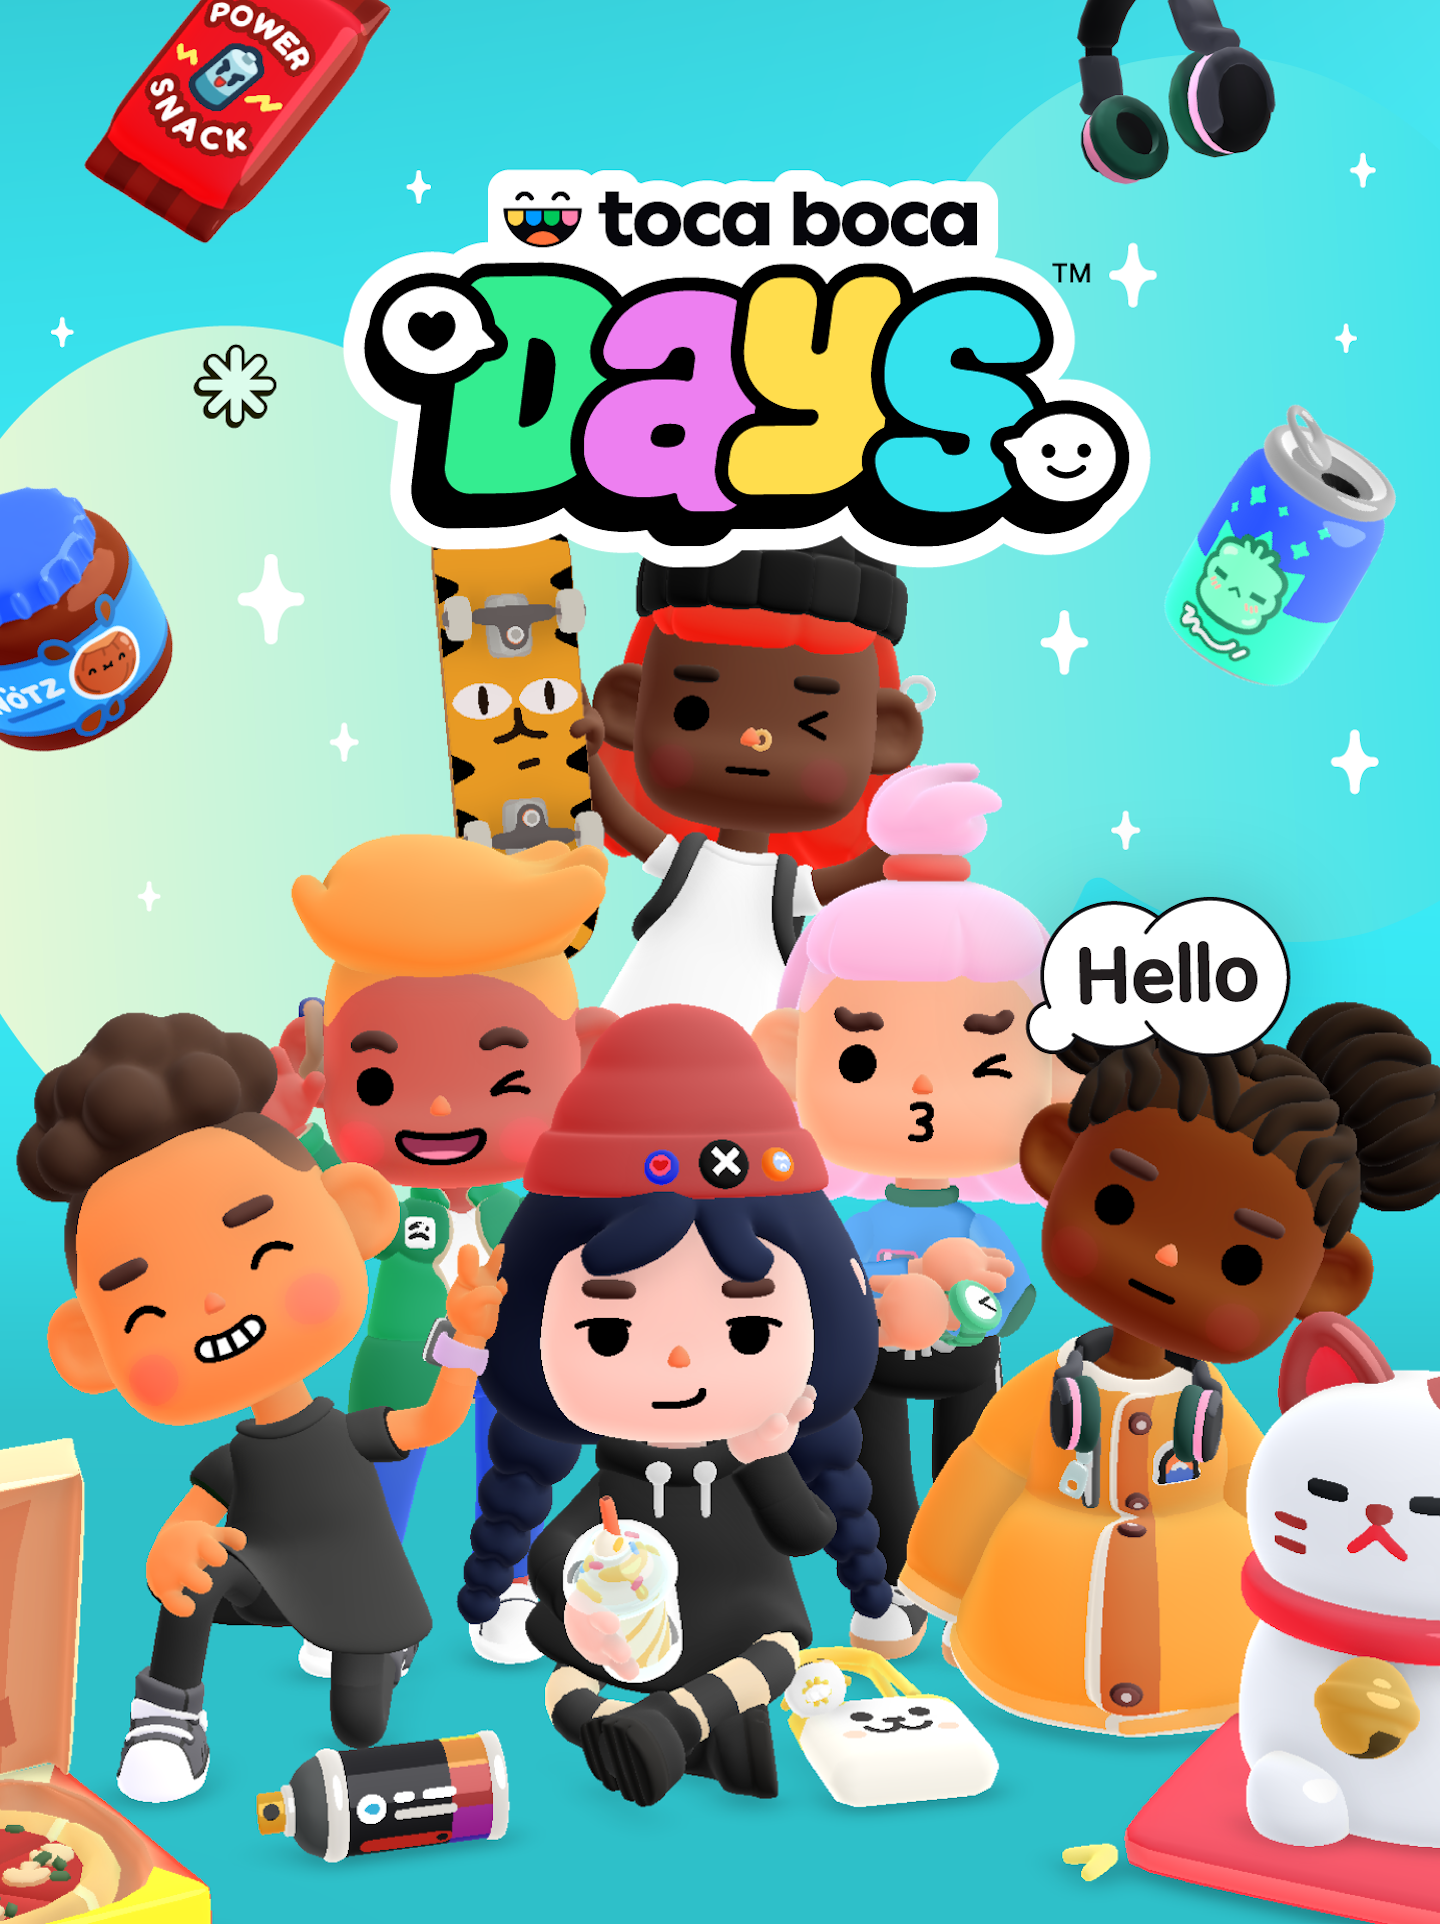 This is a portrait image of key art for the game Toca Boca Days. A group of 3D characters or avatars from the game are posing for a photo in a pyramid type cluster. They are dressed casual street cool and are pulling a variety of expressions and gestures: smiling, winking, blowing kisses and smirking. There is a speech bubble with the word "hello" coming from one of the characters. There are a number of 3D items around the image, snacks and food items as well as a pizza on the floor and a kawaii inspired cat statue to the right of the image. The Toca Boca Days game logo is in the top 3rd of the image. The words "Toca Boca" are in black text with the Toca Boca studio logo to the left, whereas the word "Days" has vibrant stacked lettering and with social bubbles with emojis to either side.